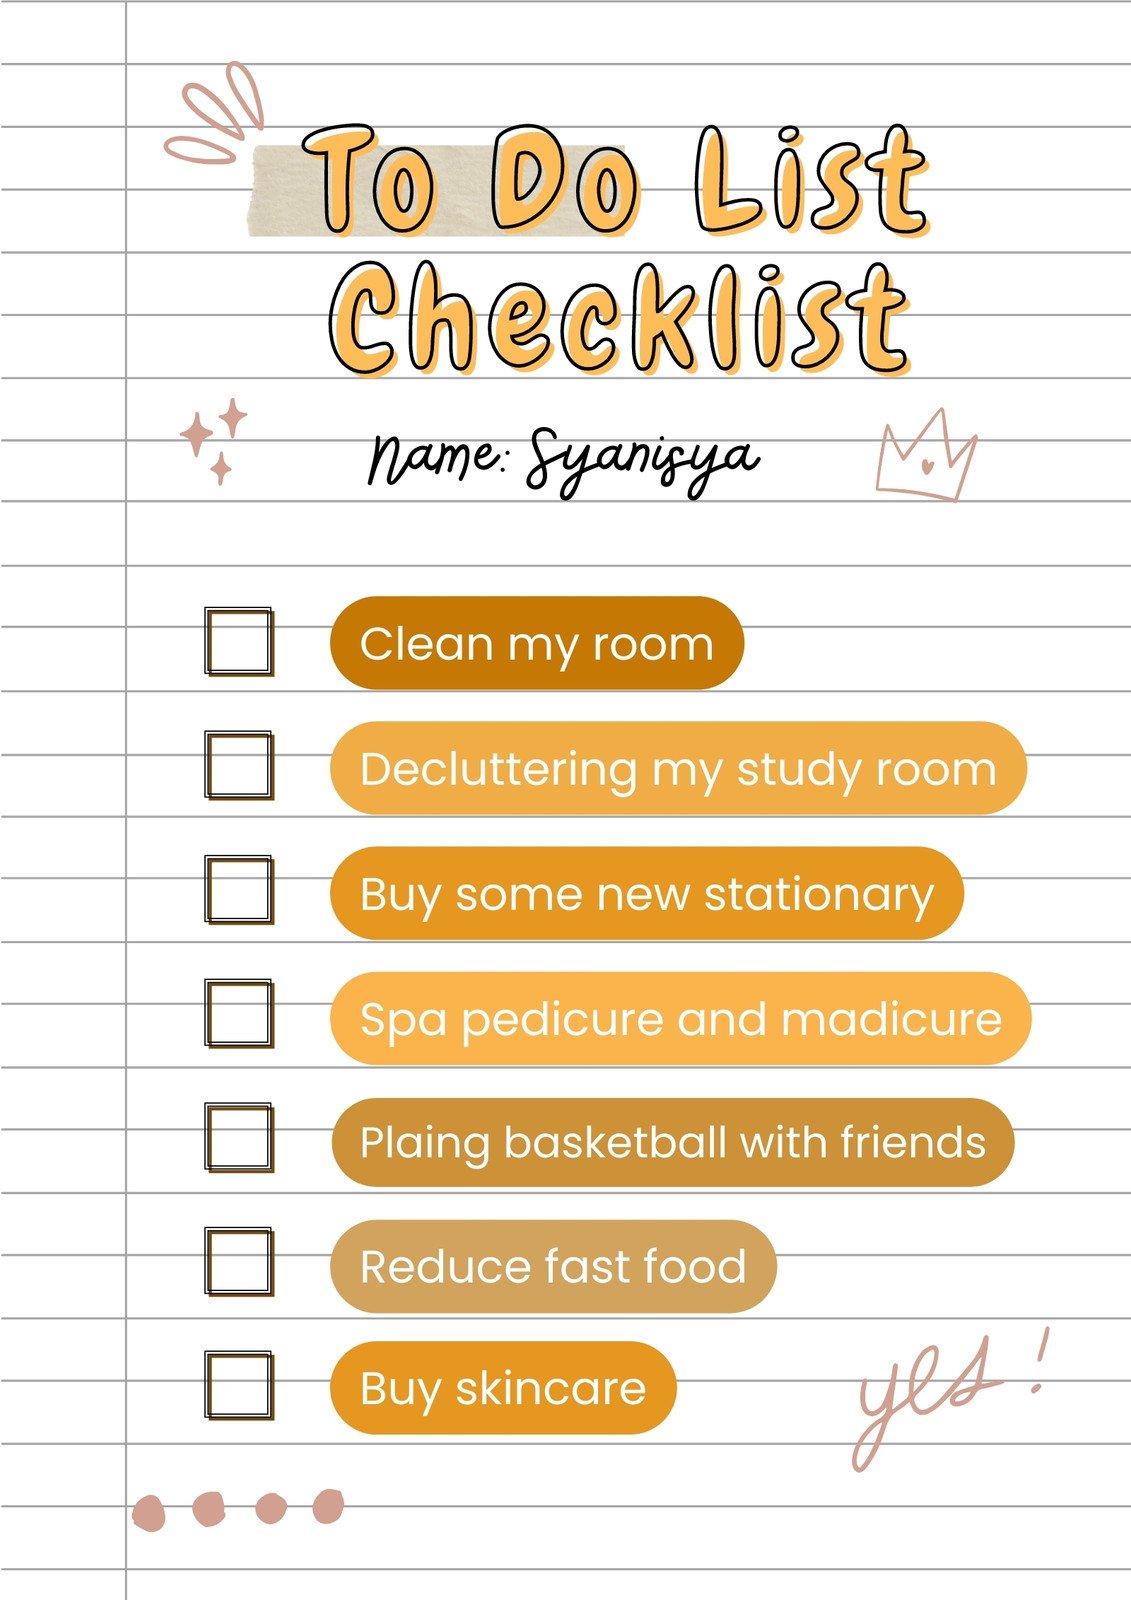 Canva White Paper Creative Printable To Do List Checklist 3YM72GN5G1g 